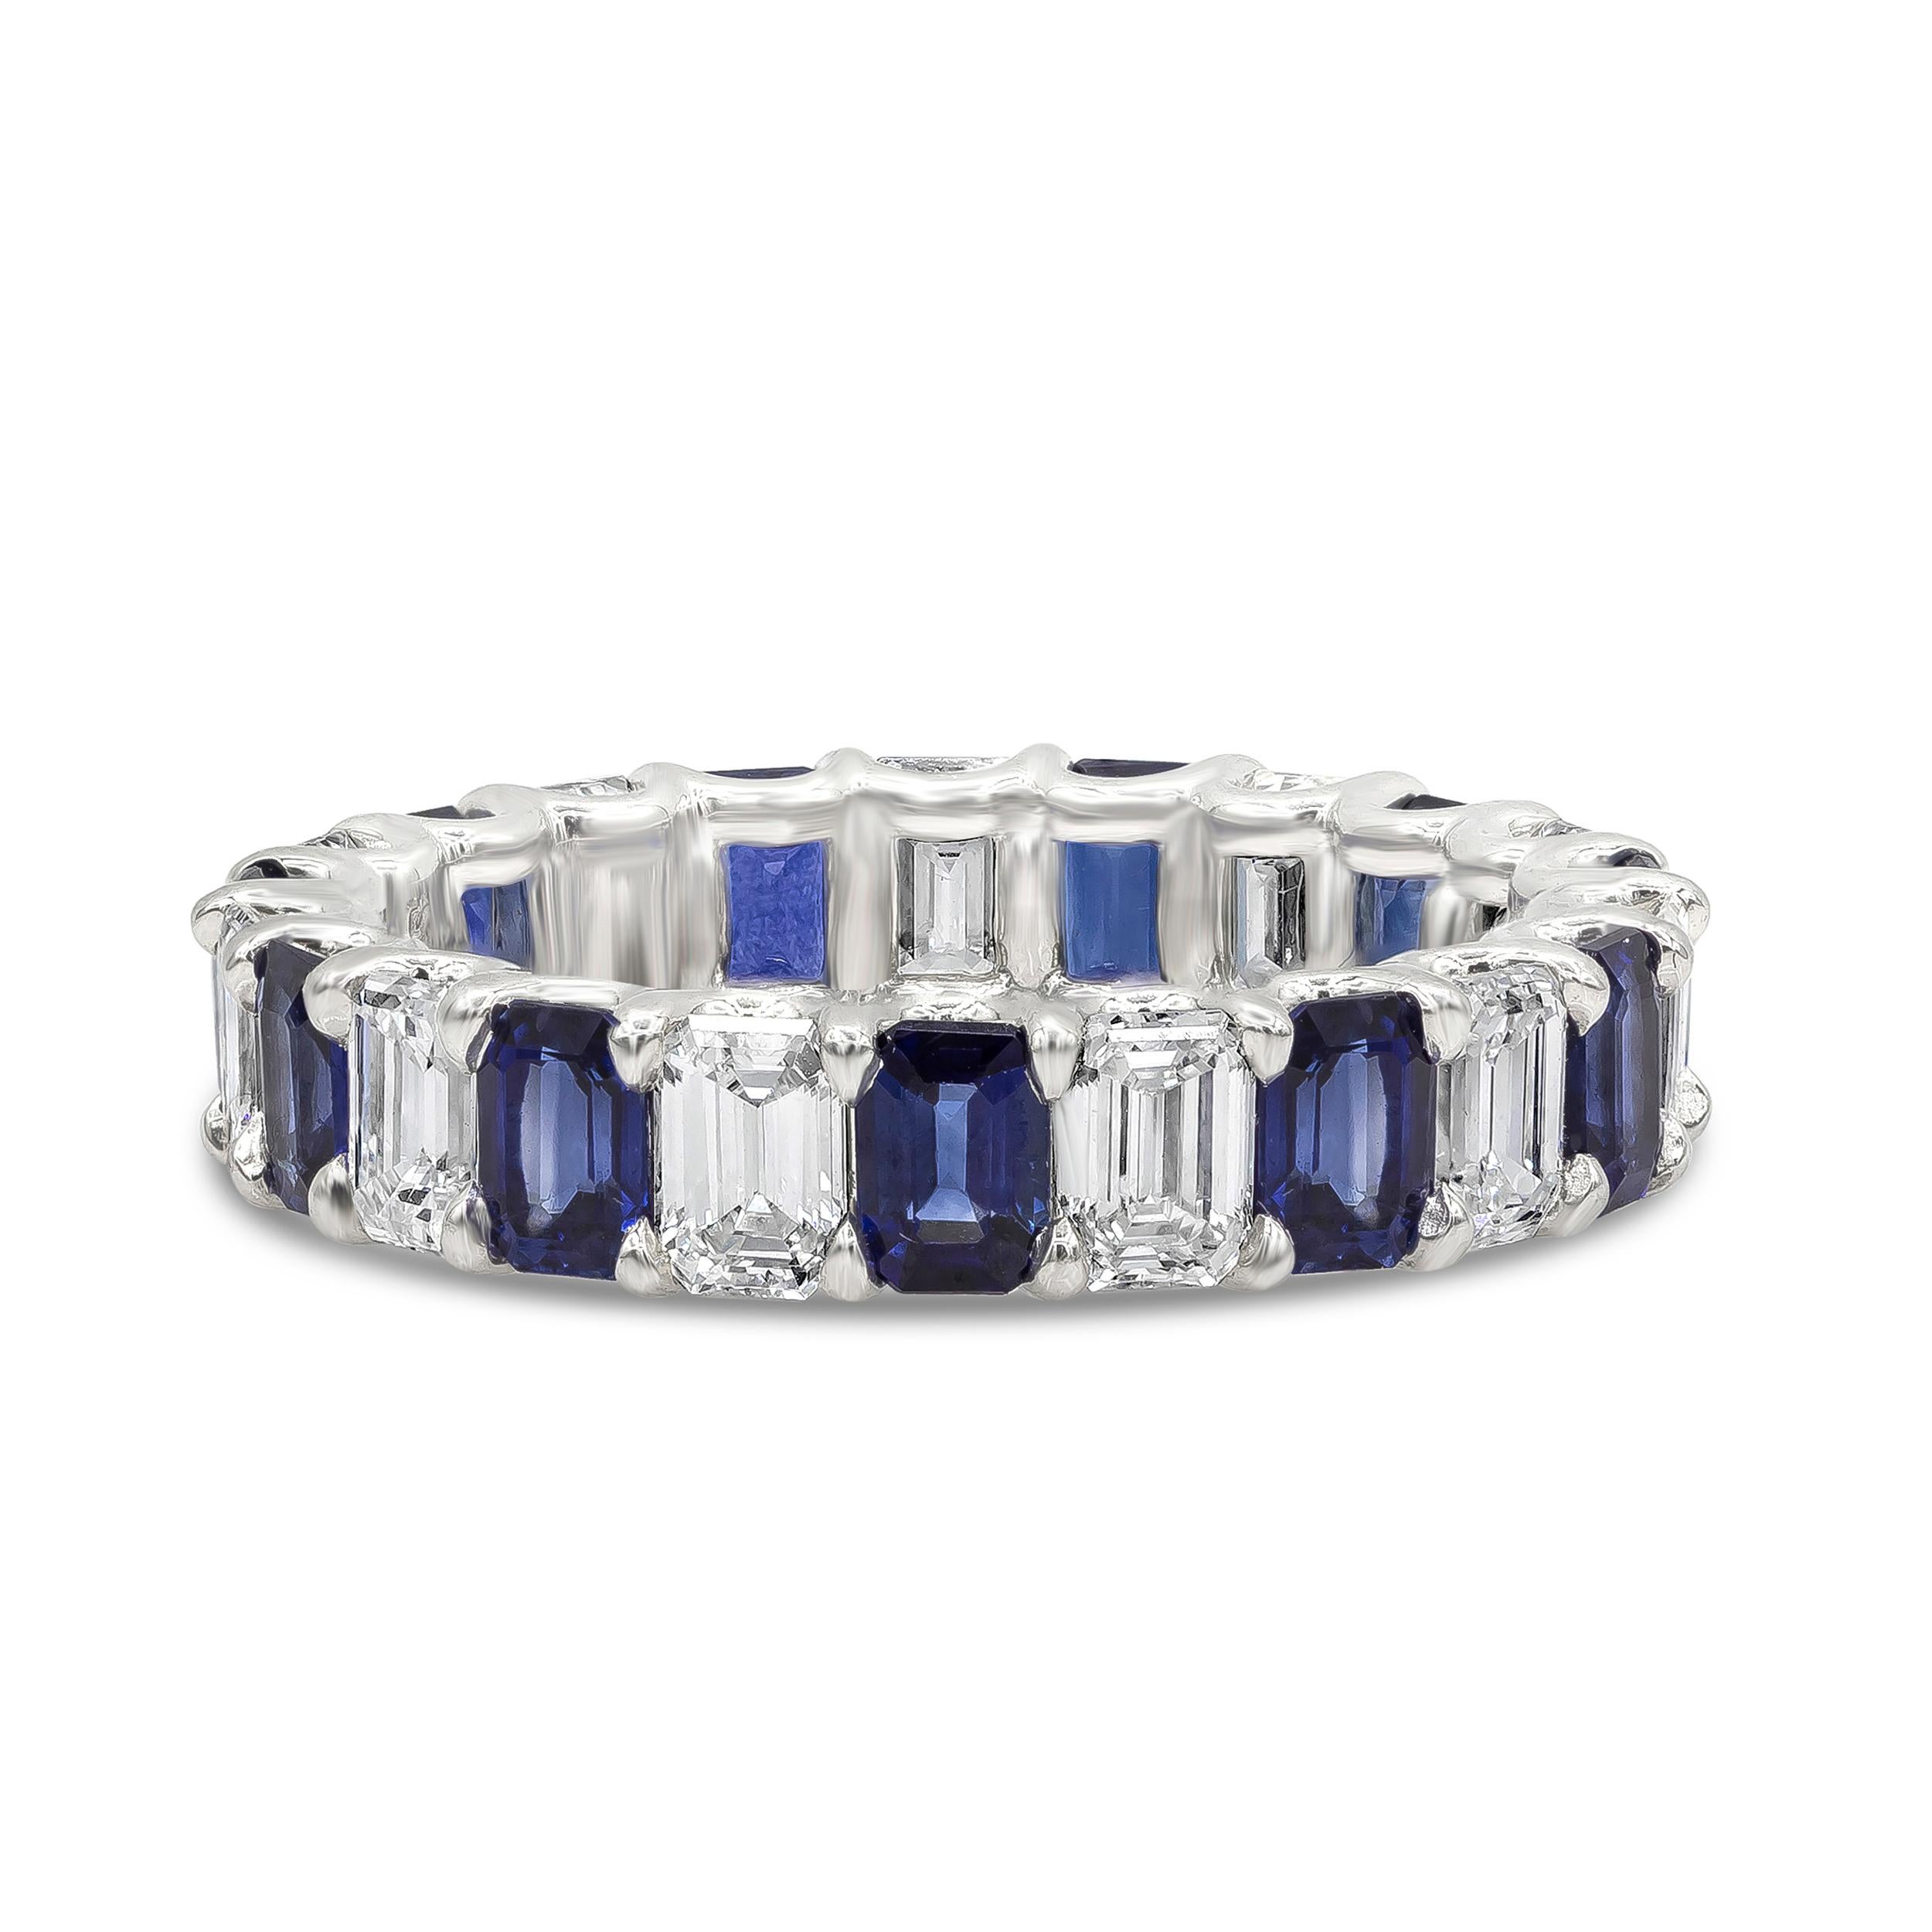 Features color-rich blue sapphires that elegantly alternate with emerald cut diamonds in a polished platinum mounting. Sapphires weigh 2.61 carats total; diamonds weigh 2.20 carats total. 

Style available in different price ranges. Prices are based